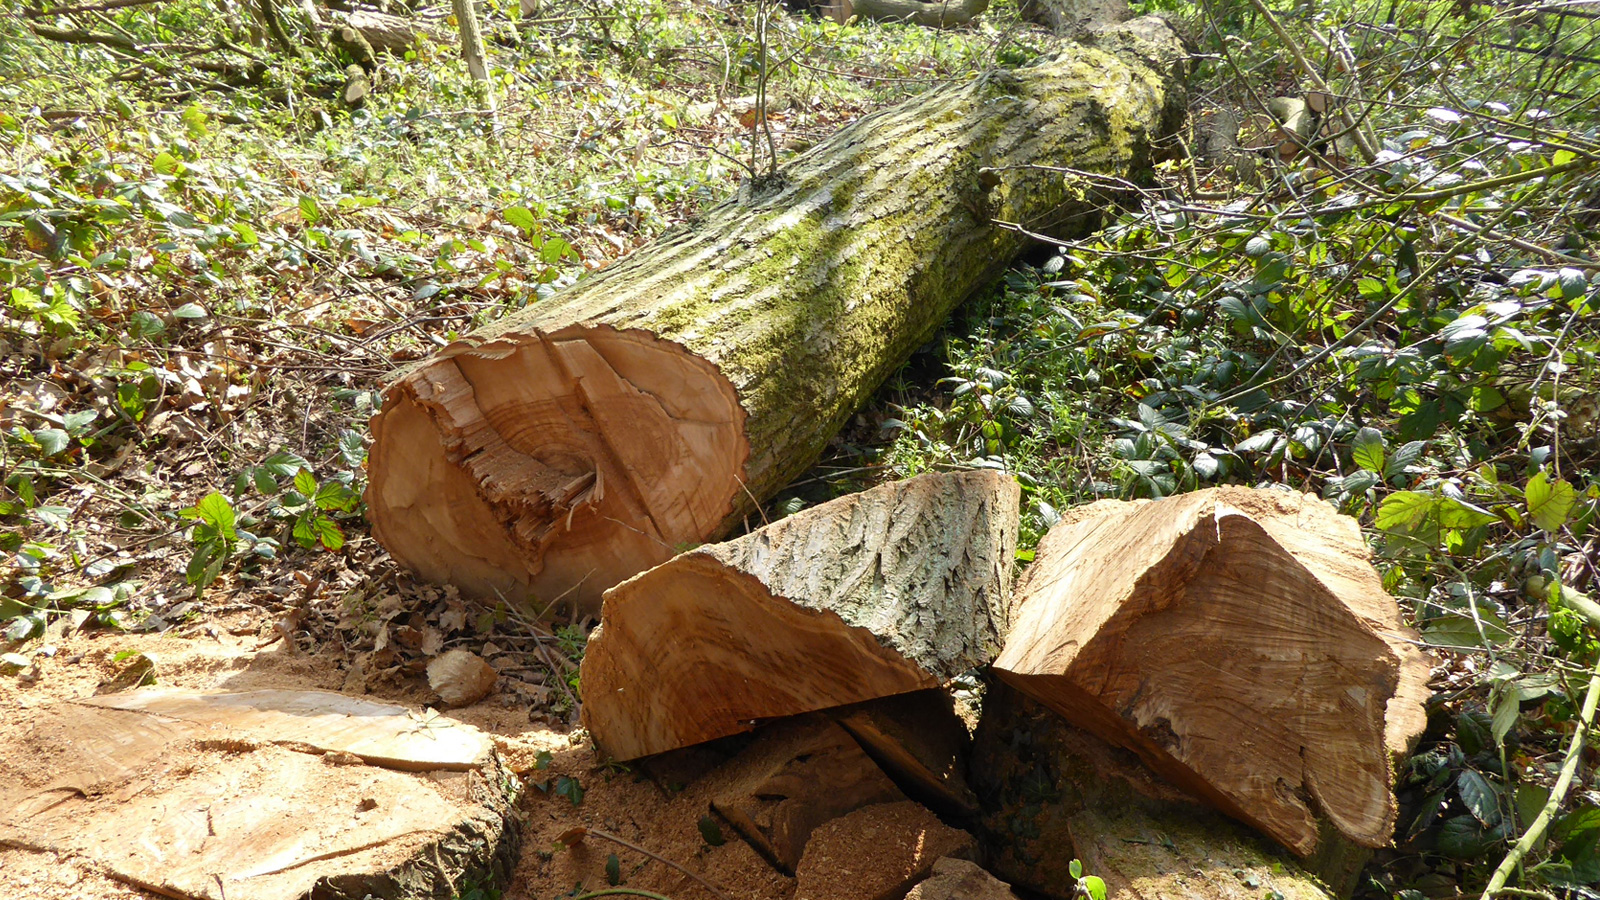 A fallen tree being dealt with, about to be logged for firewood